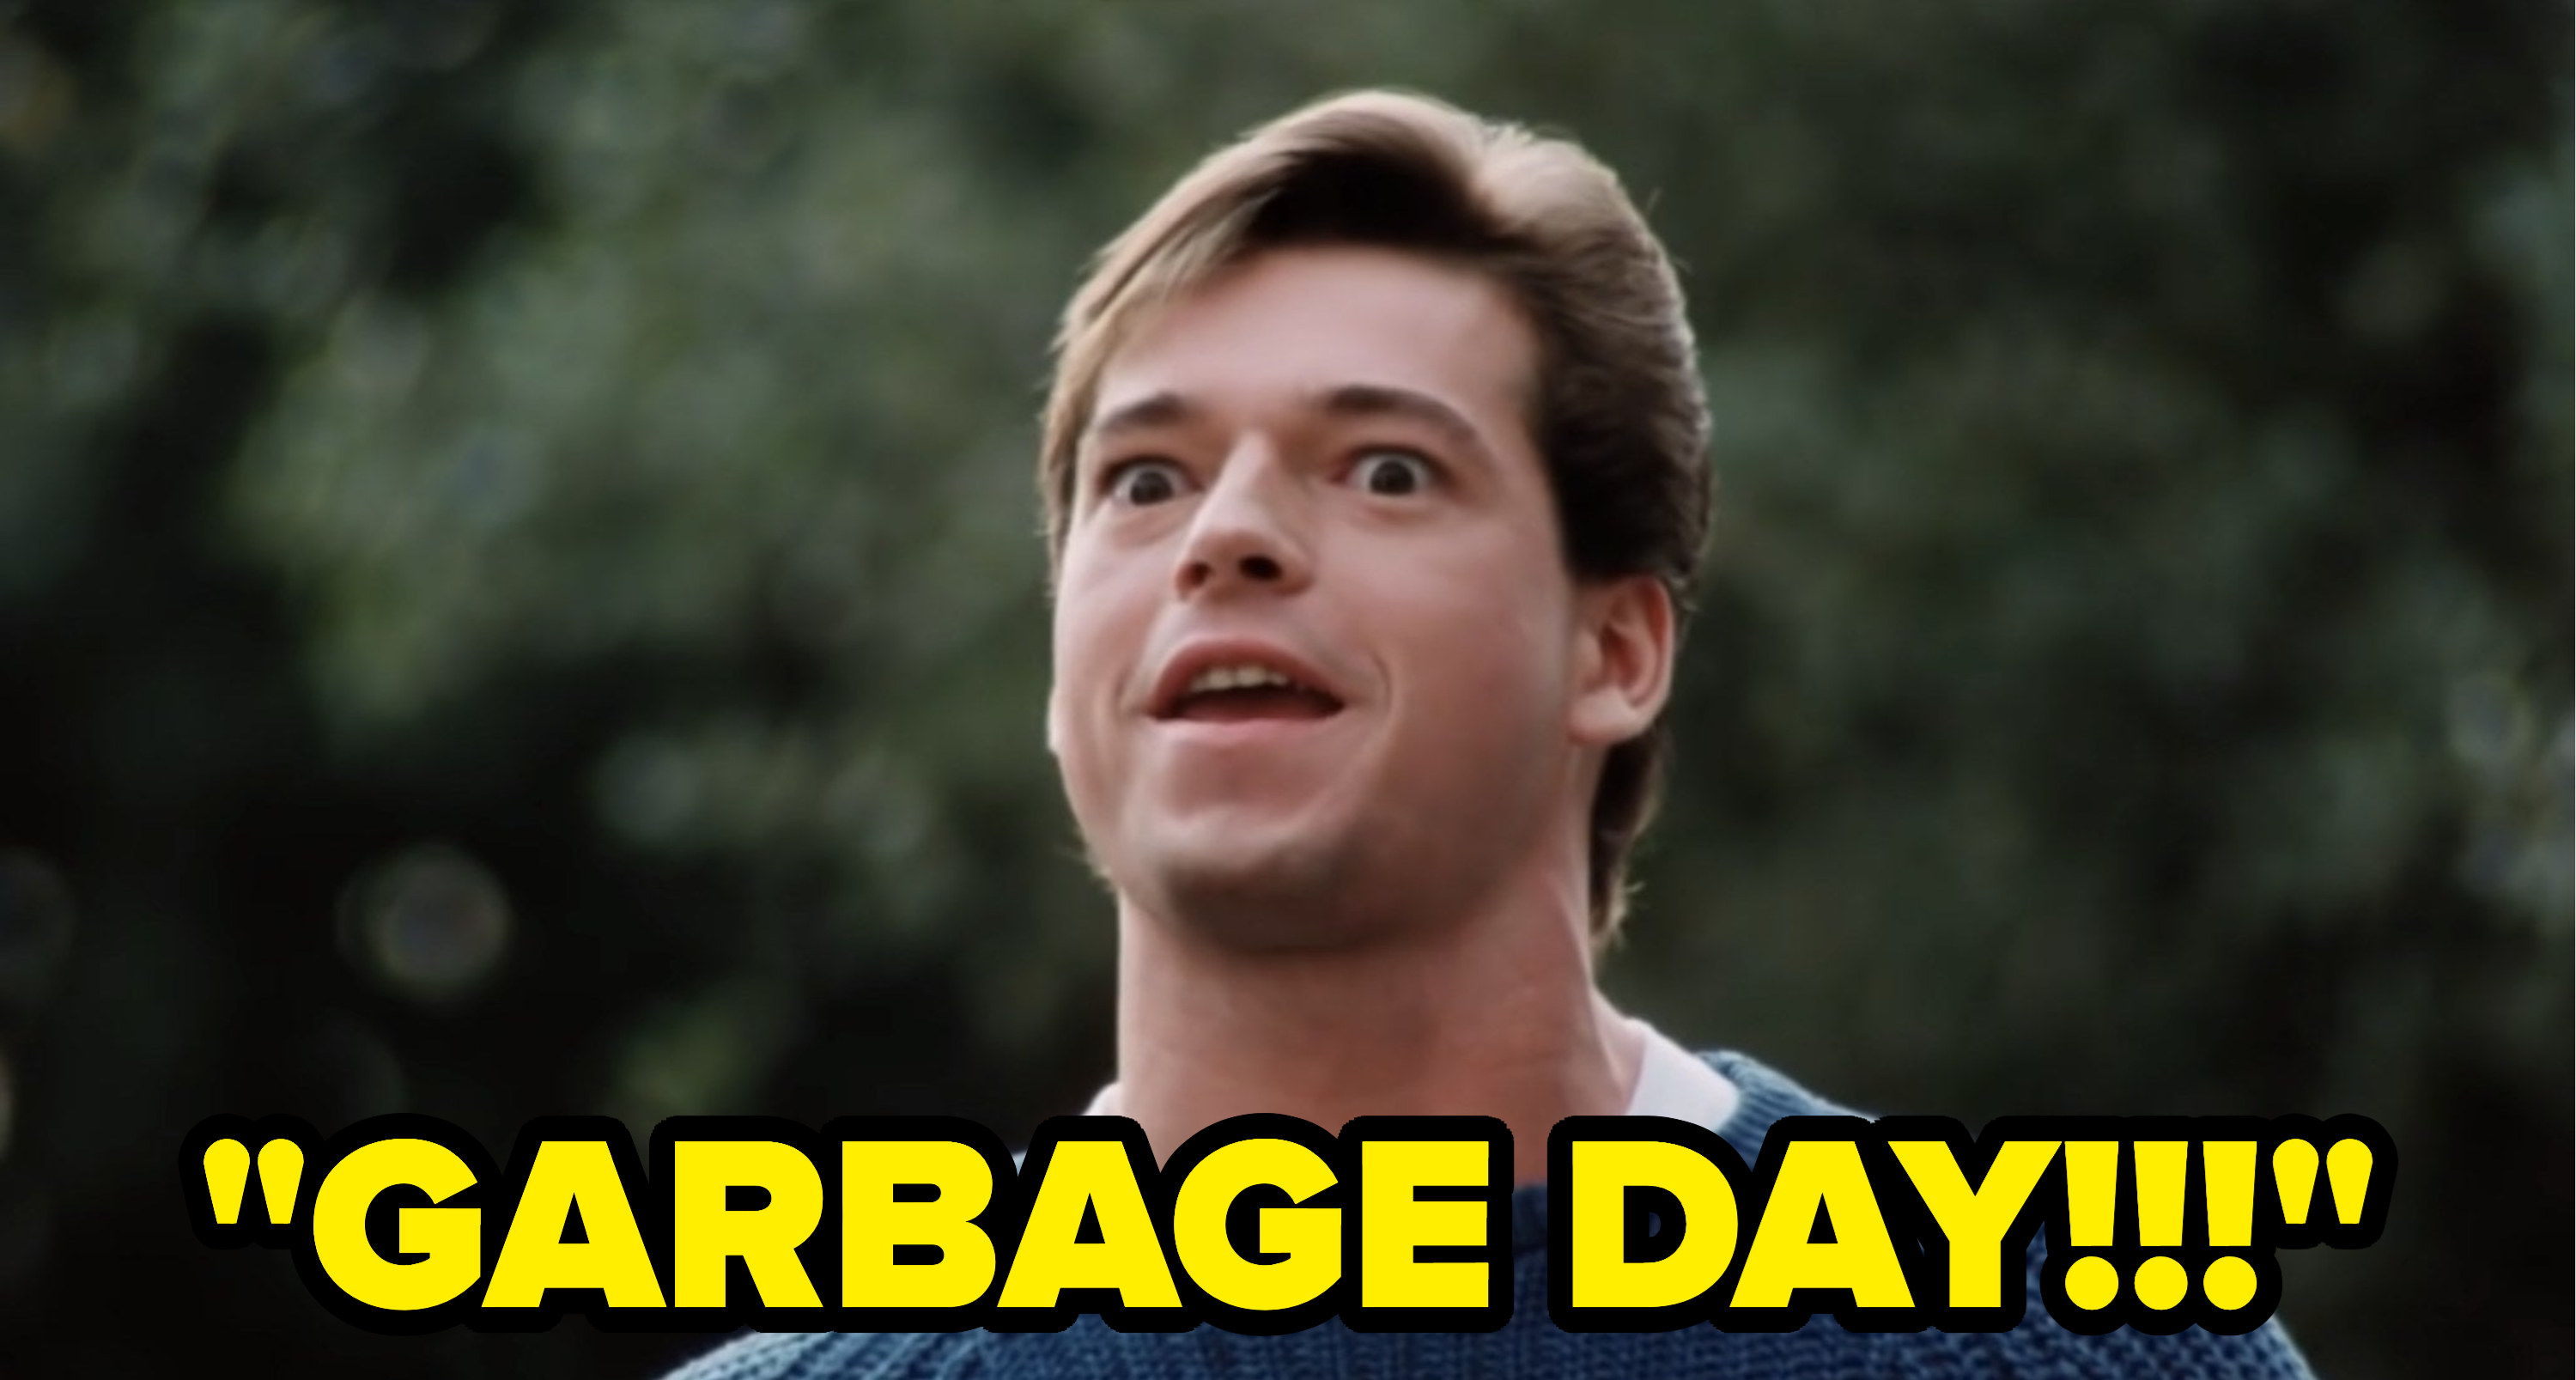 ricky saying garbage day in silent night deadly night 2